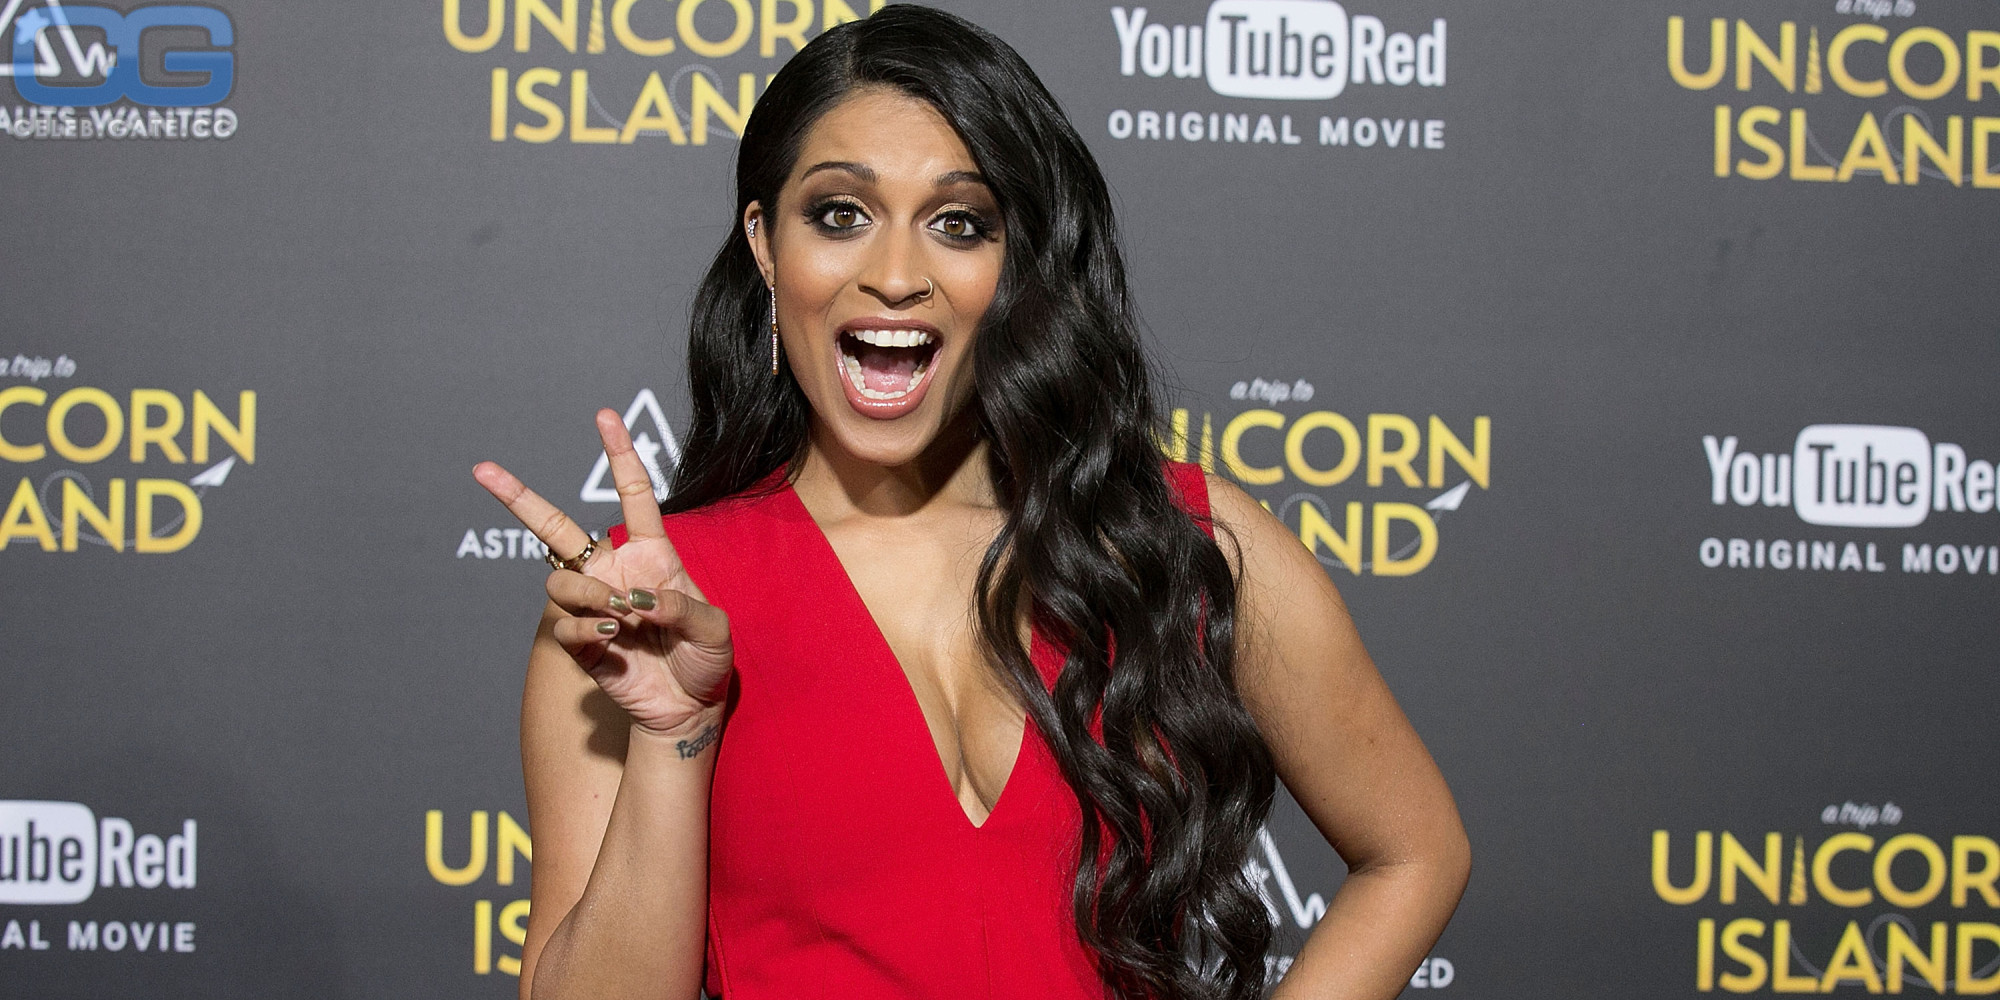 Lilly Singh cleavage